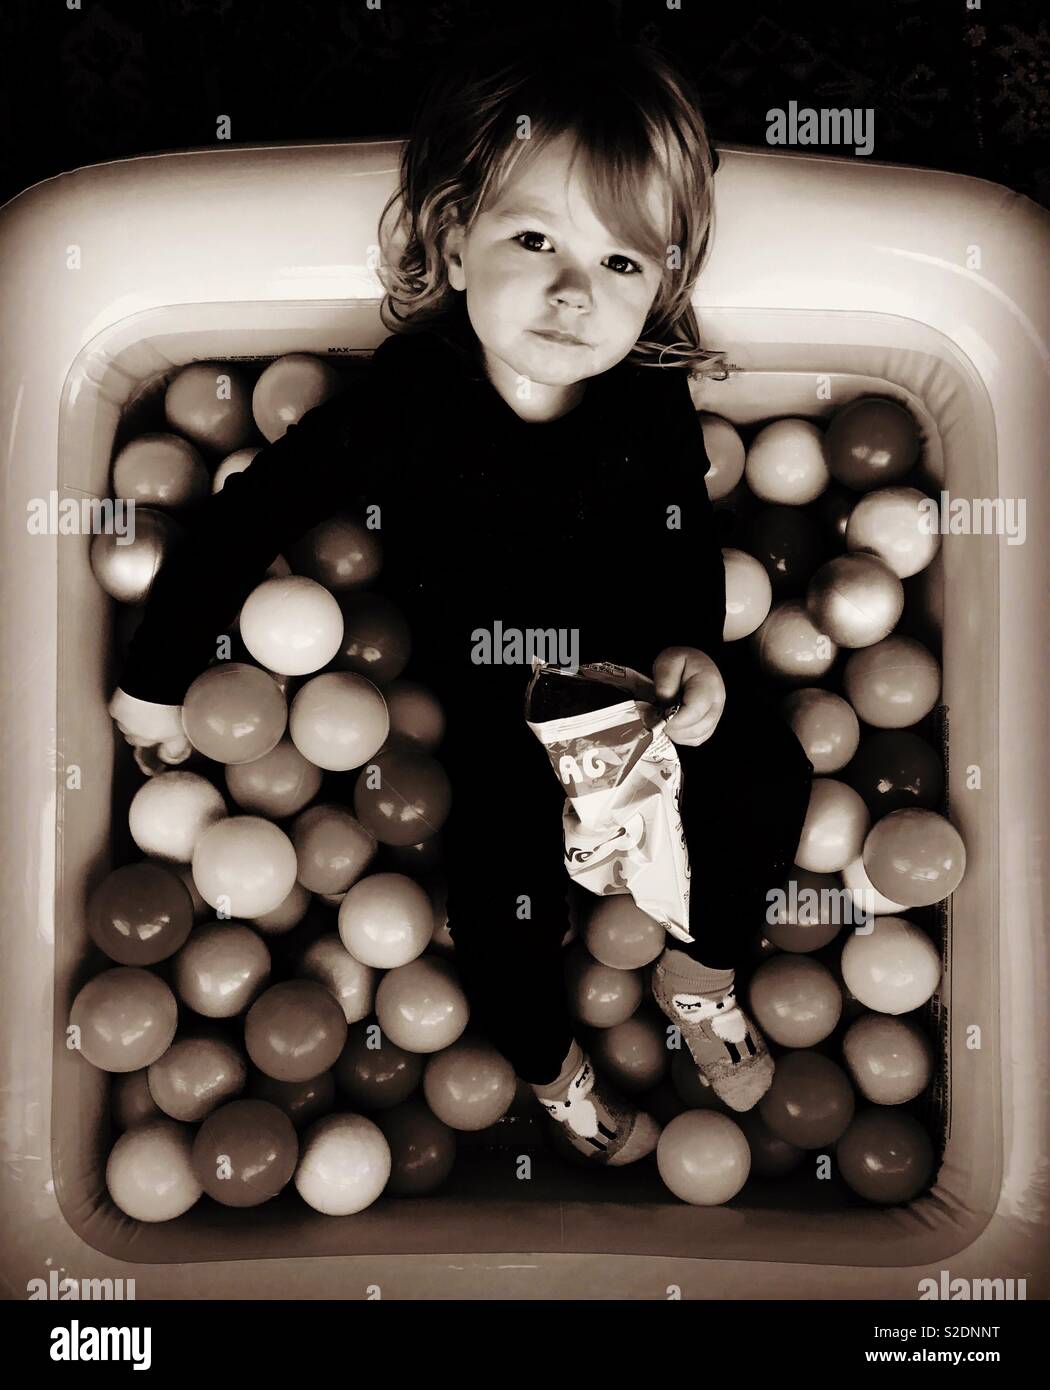 My friends daughter owning the ball pit.. Stock Photo